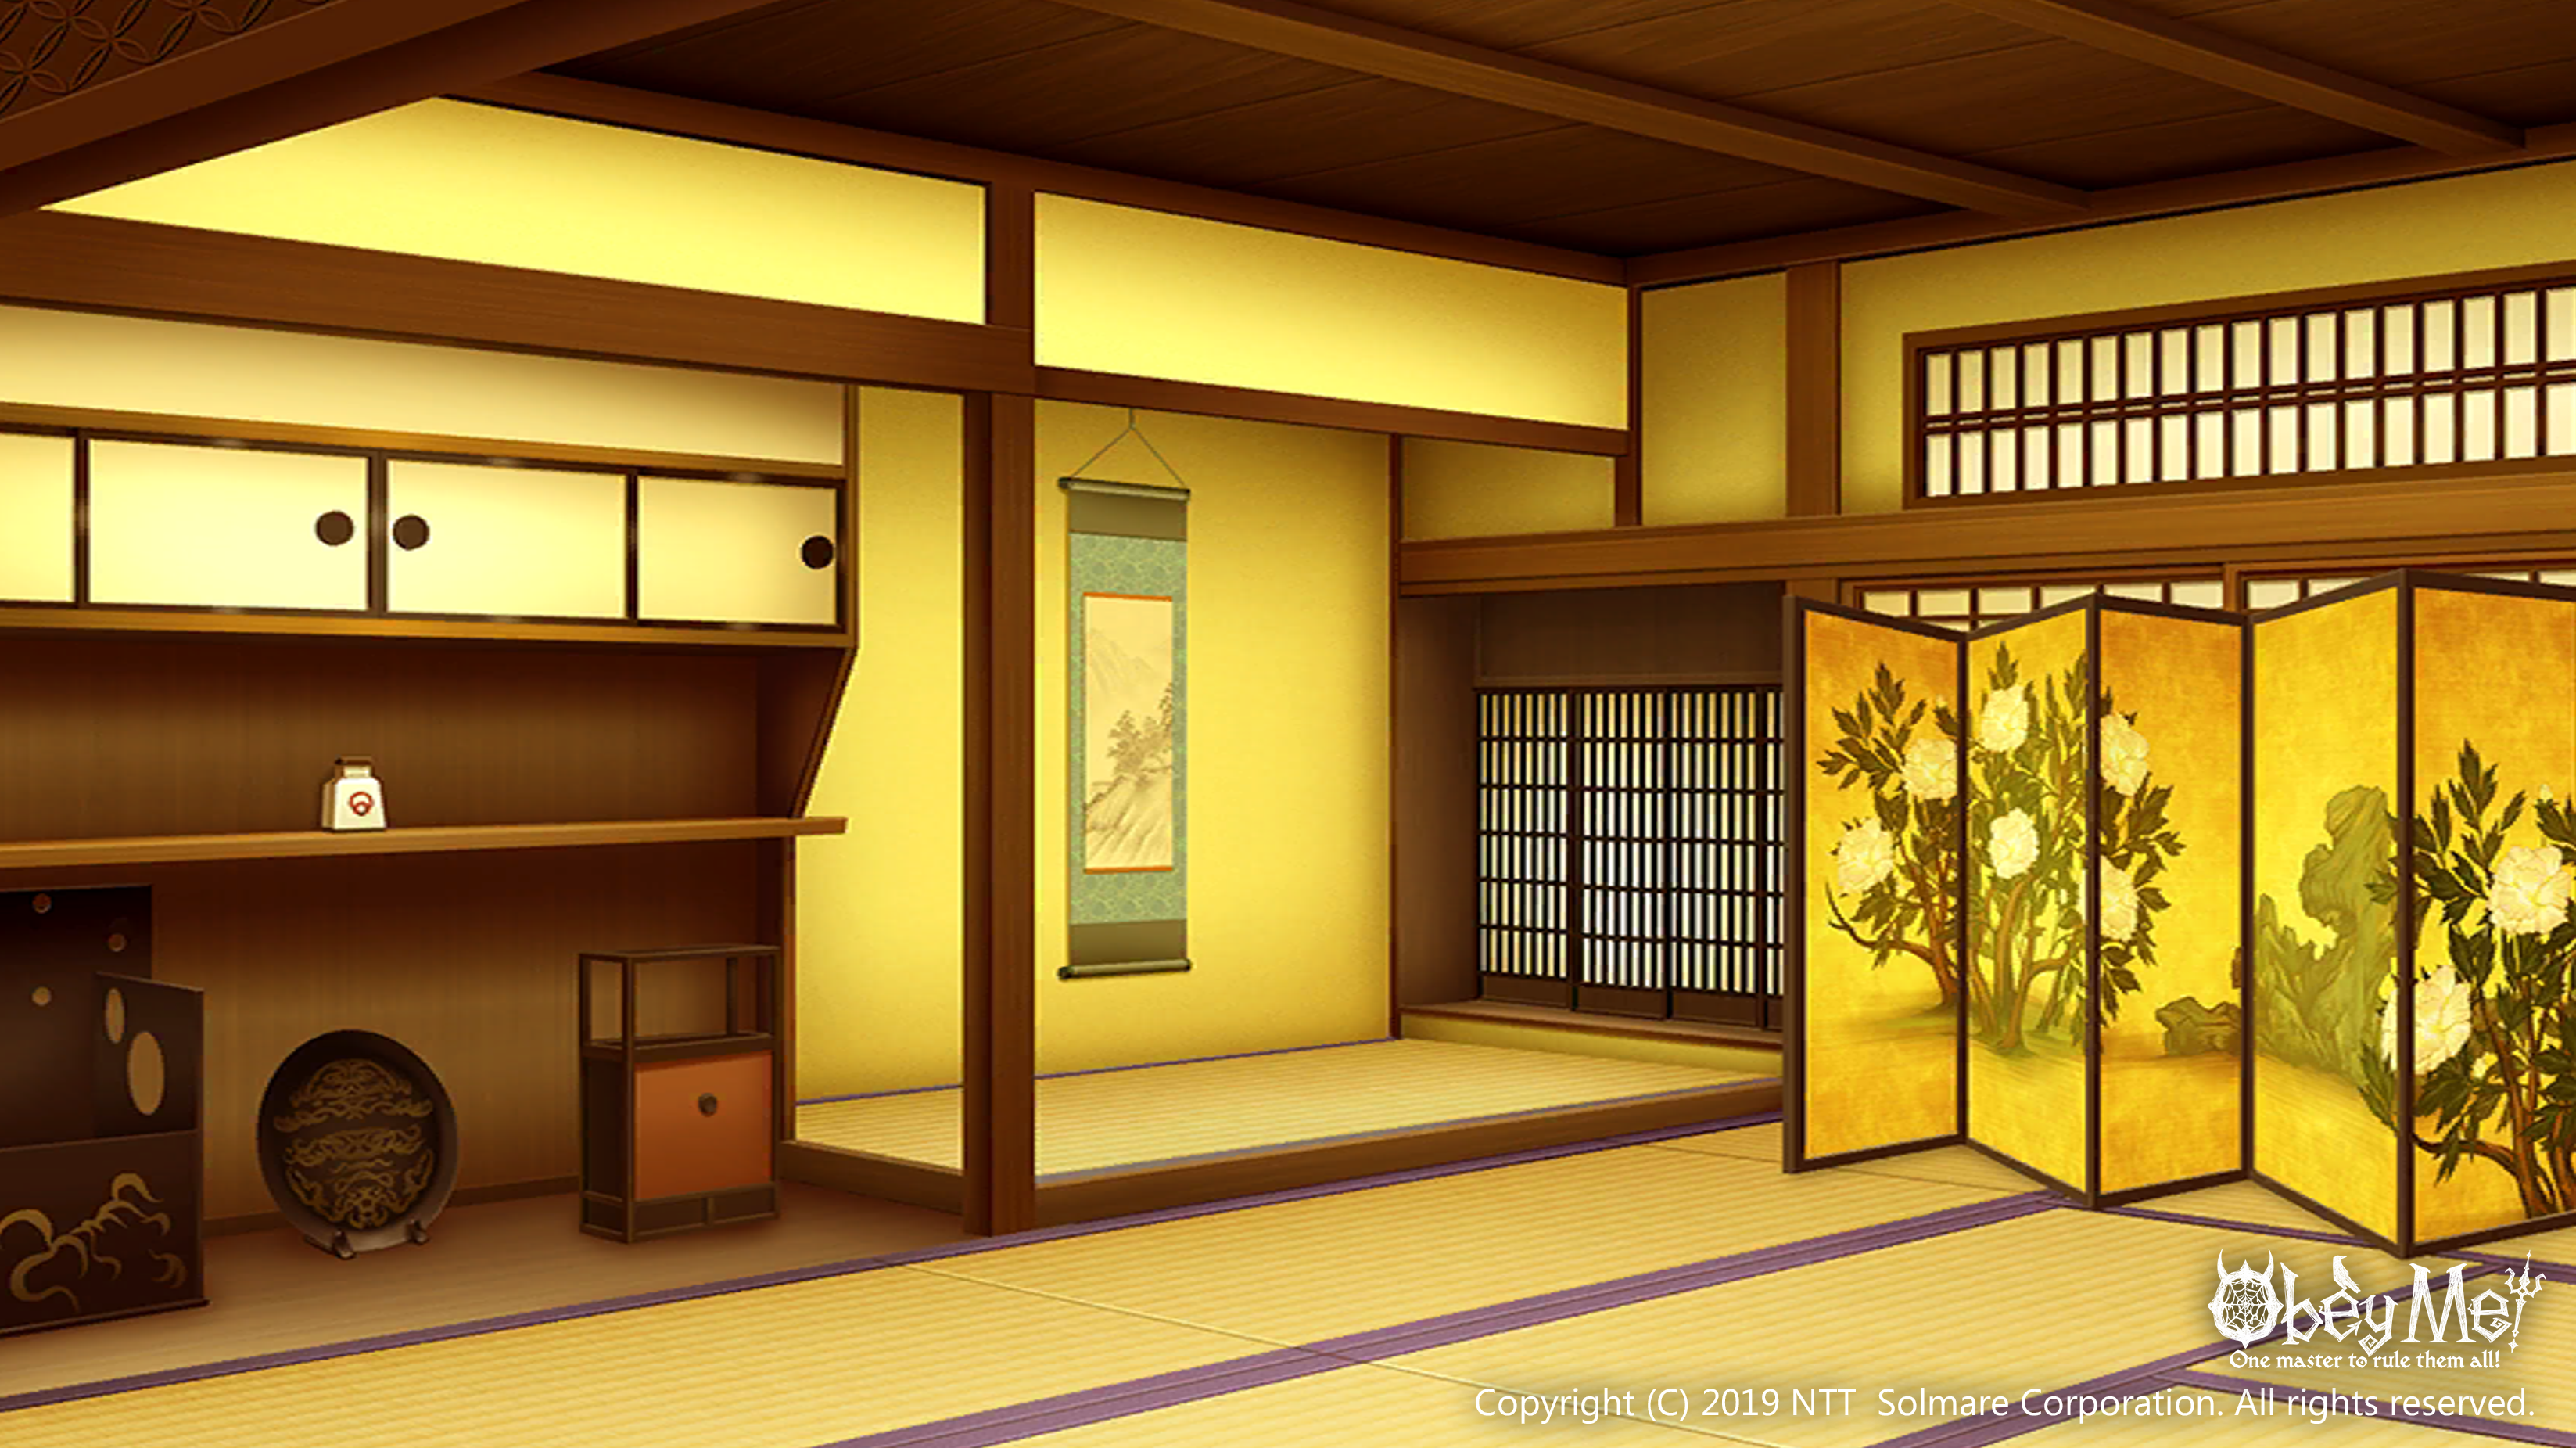 upload "Traditional Room.png"